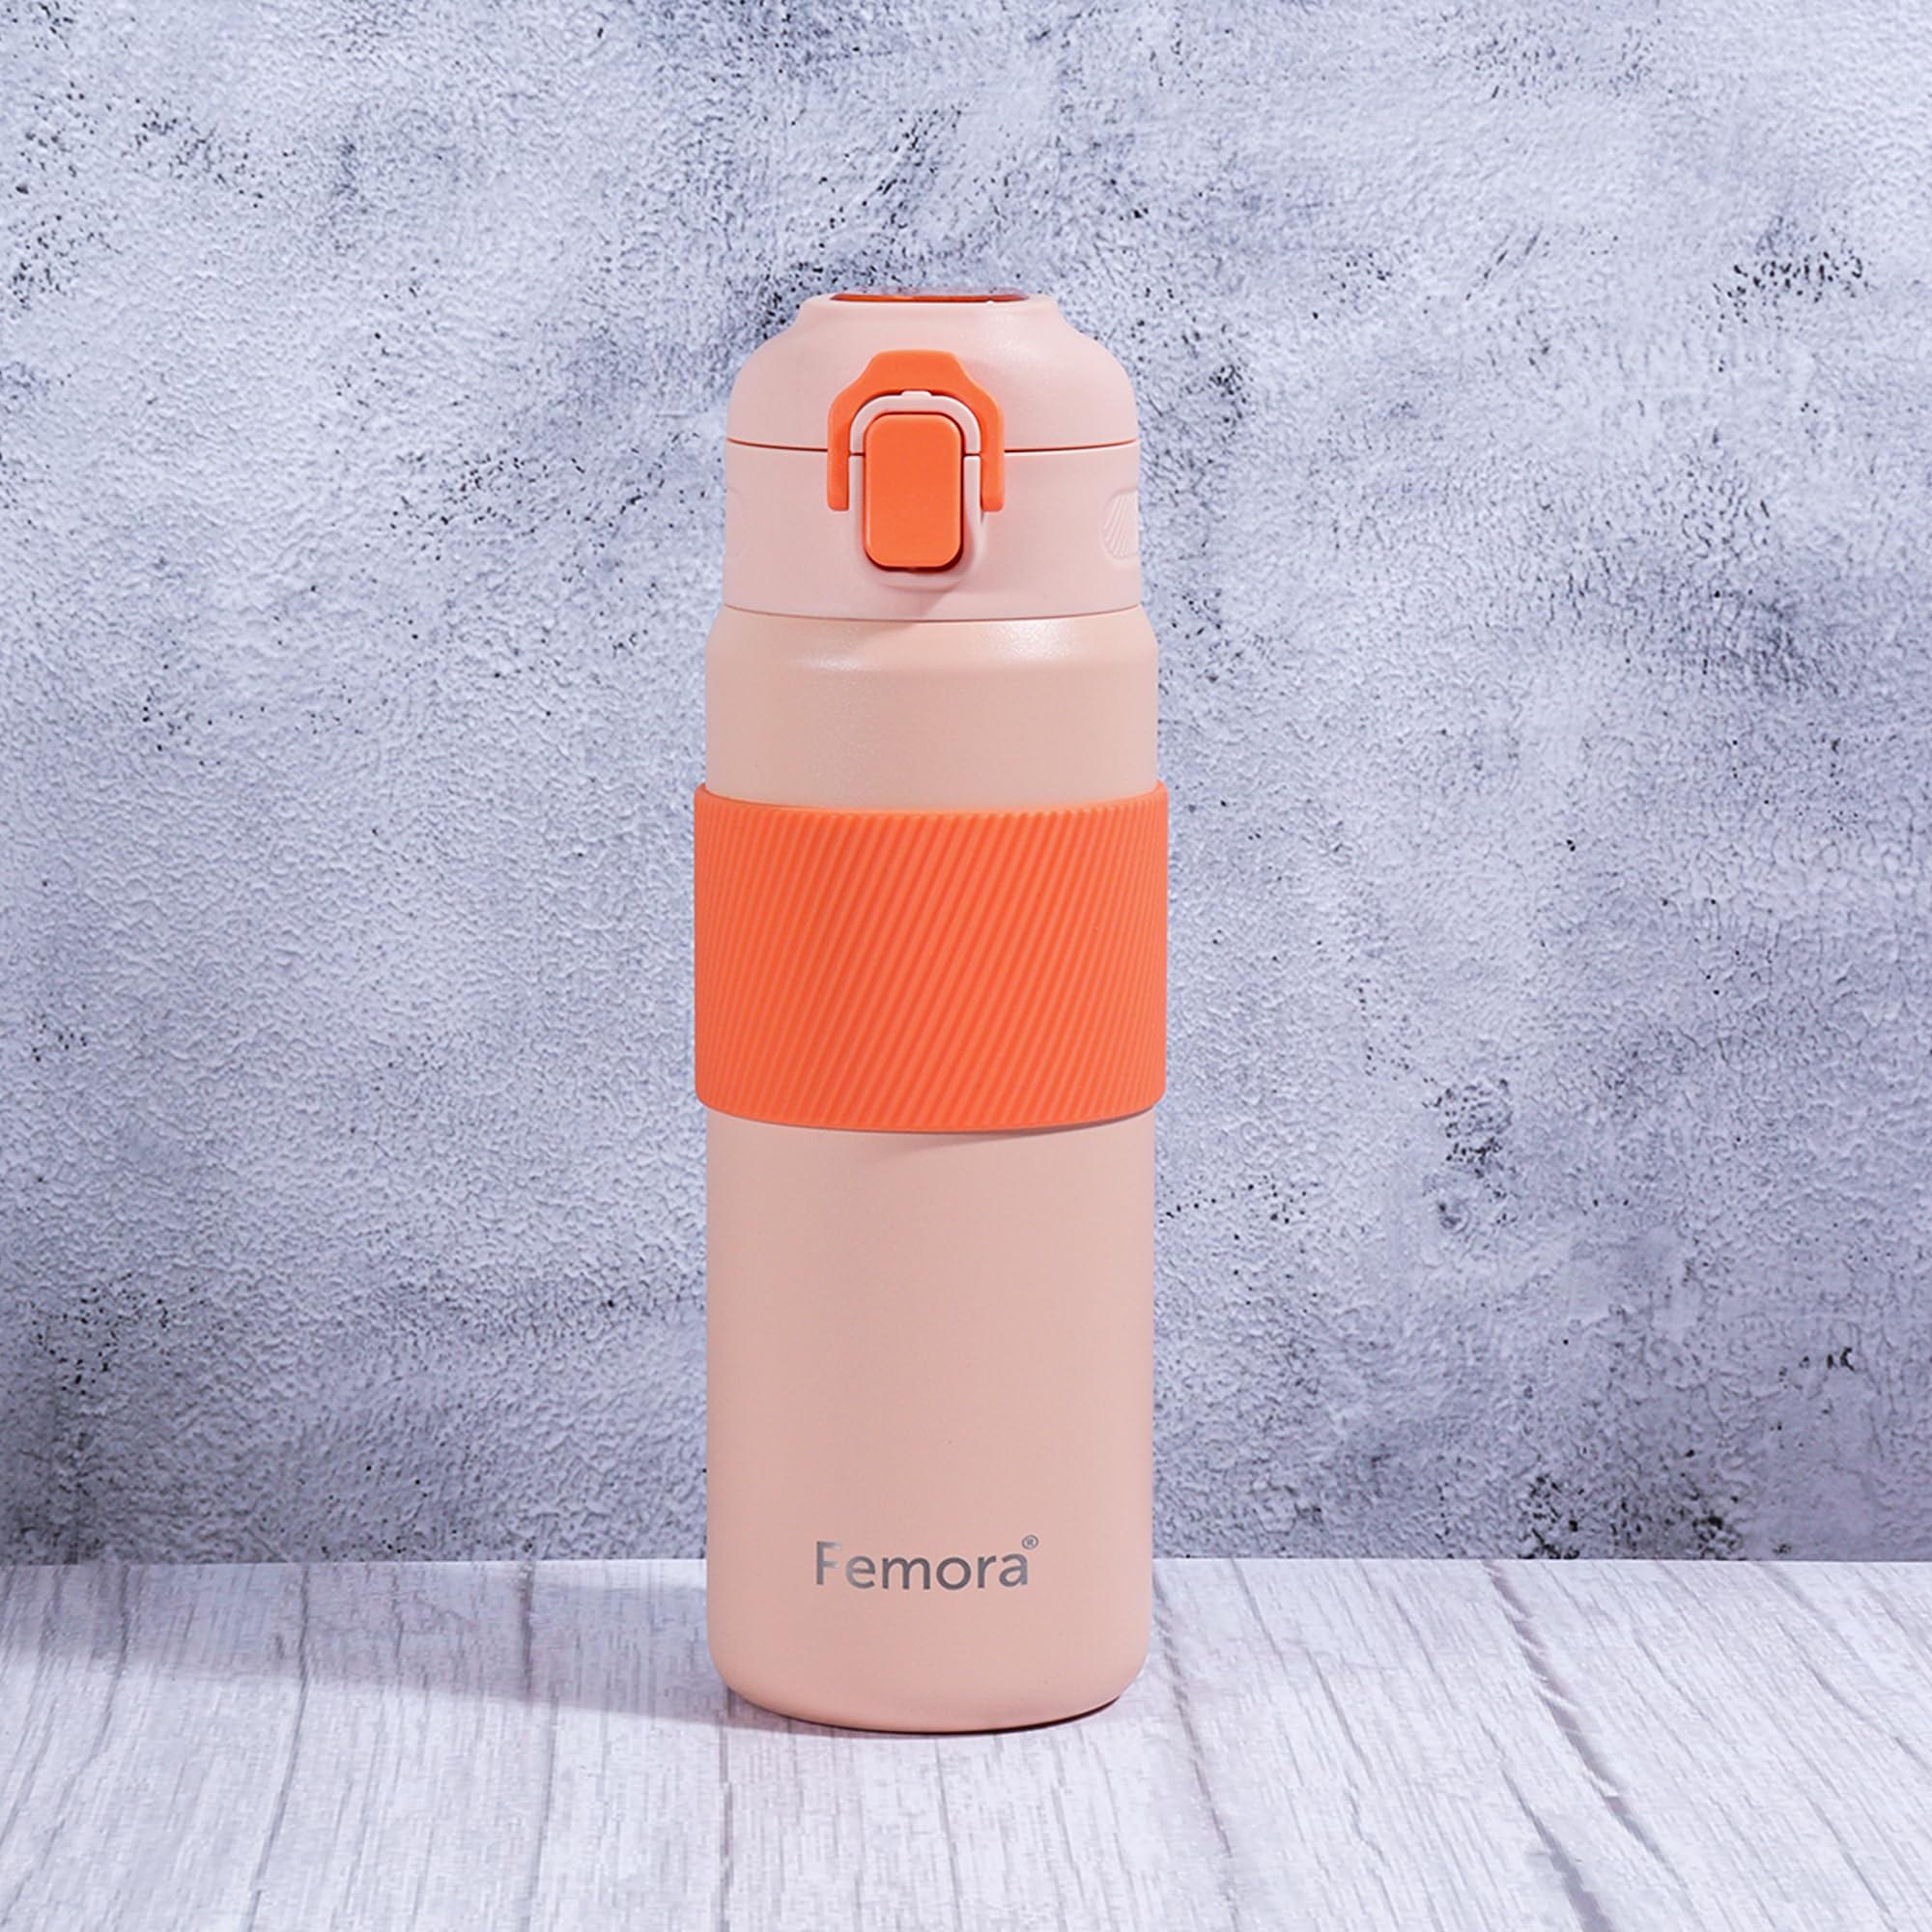 Femora HydroPro Double Walled Stainless Steel Vacuum Insulated Flask Water Bottle, 600 ML, Orange